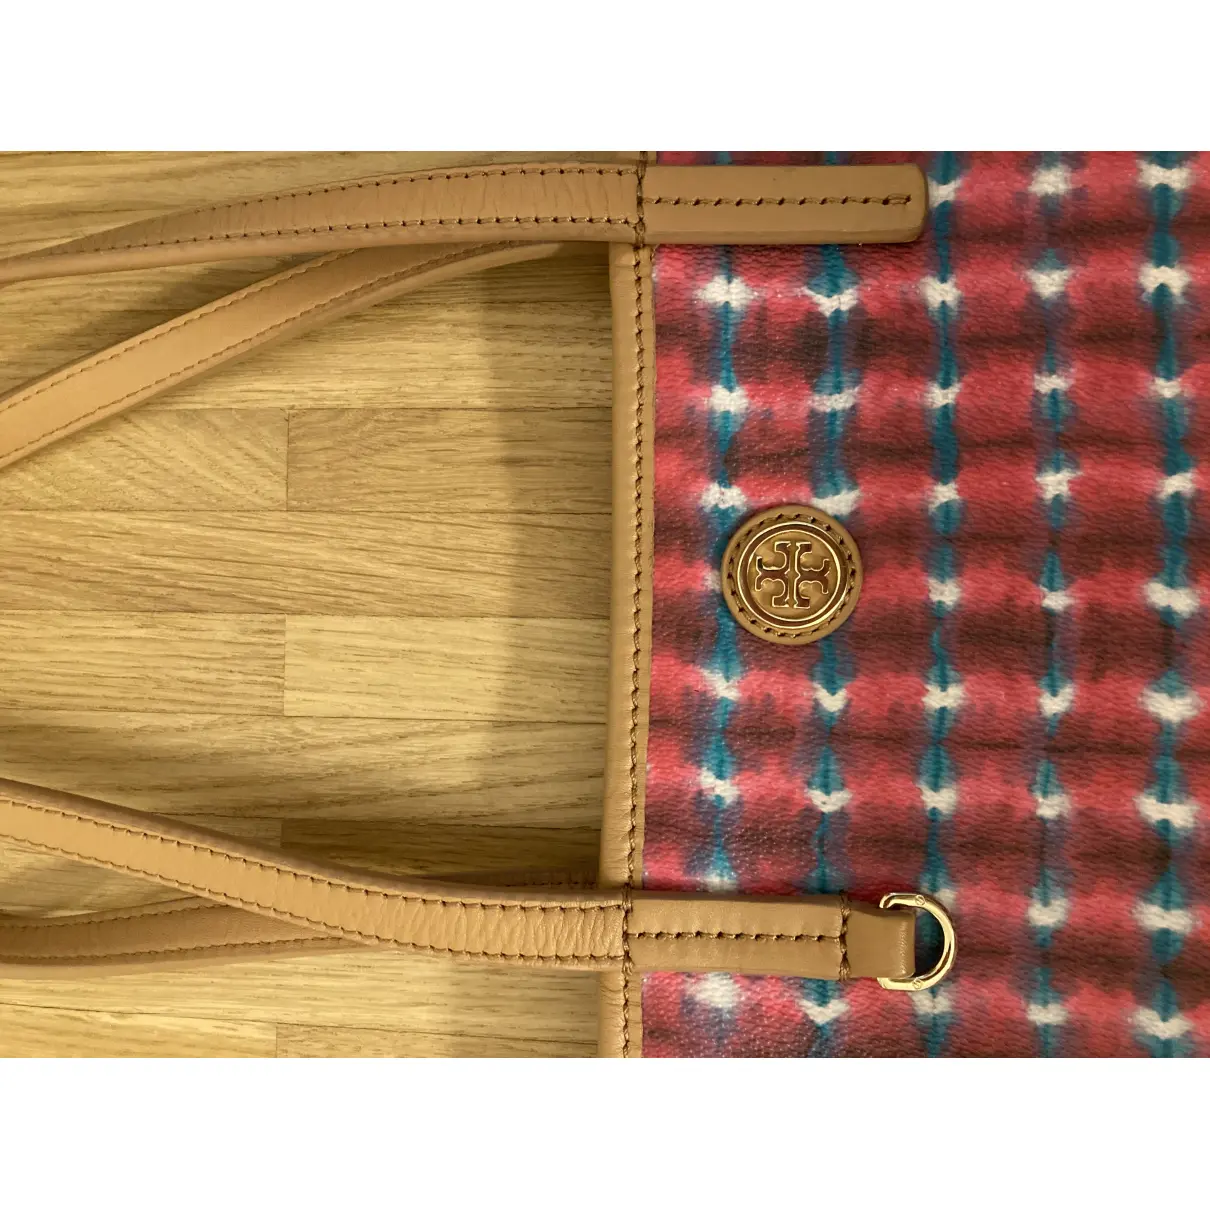 Patent leather tote Tory Burch